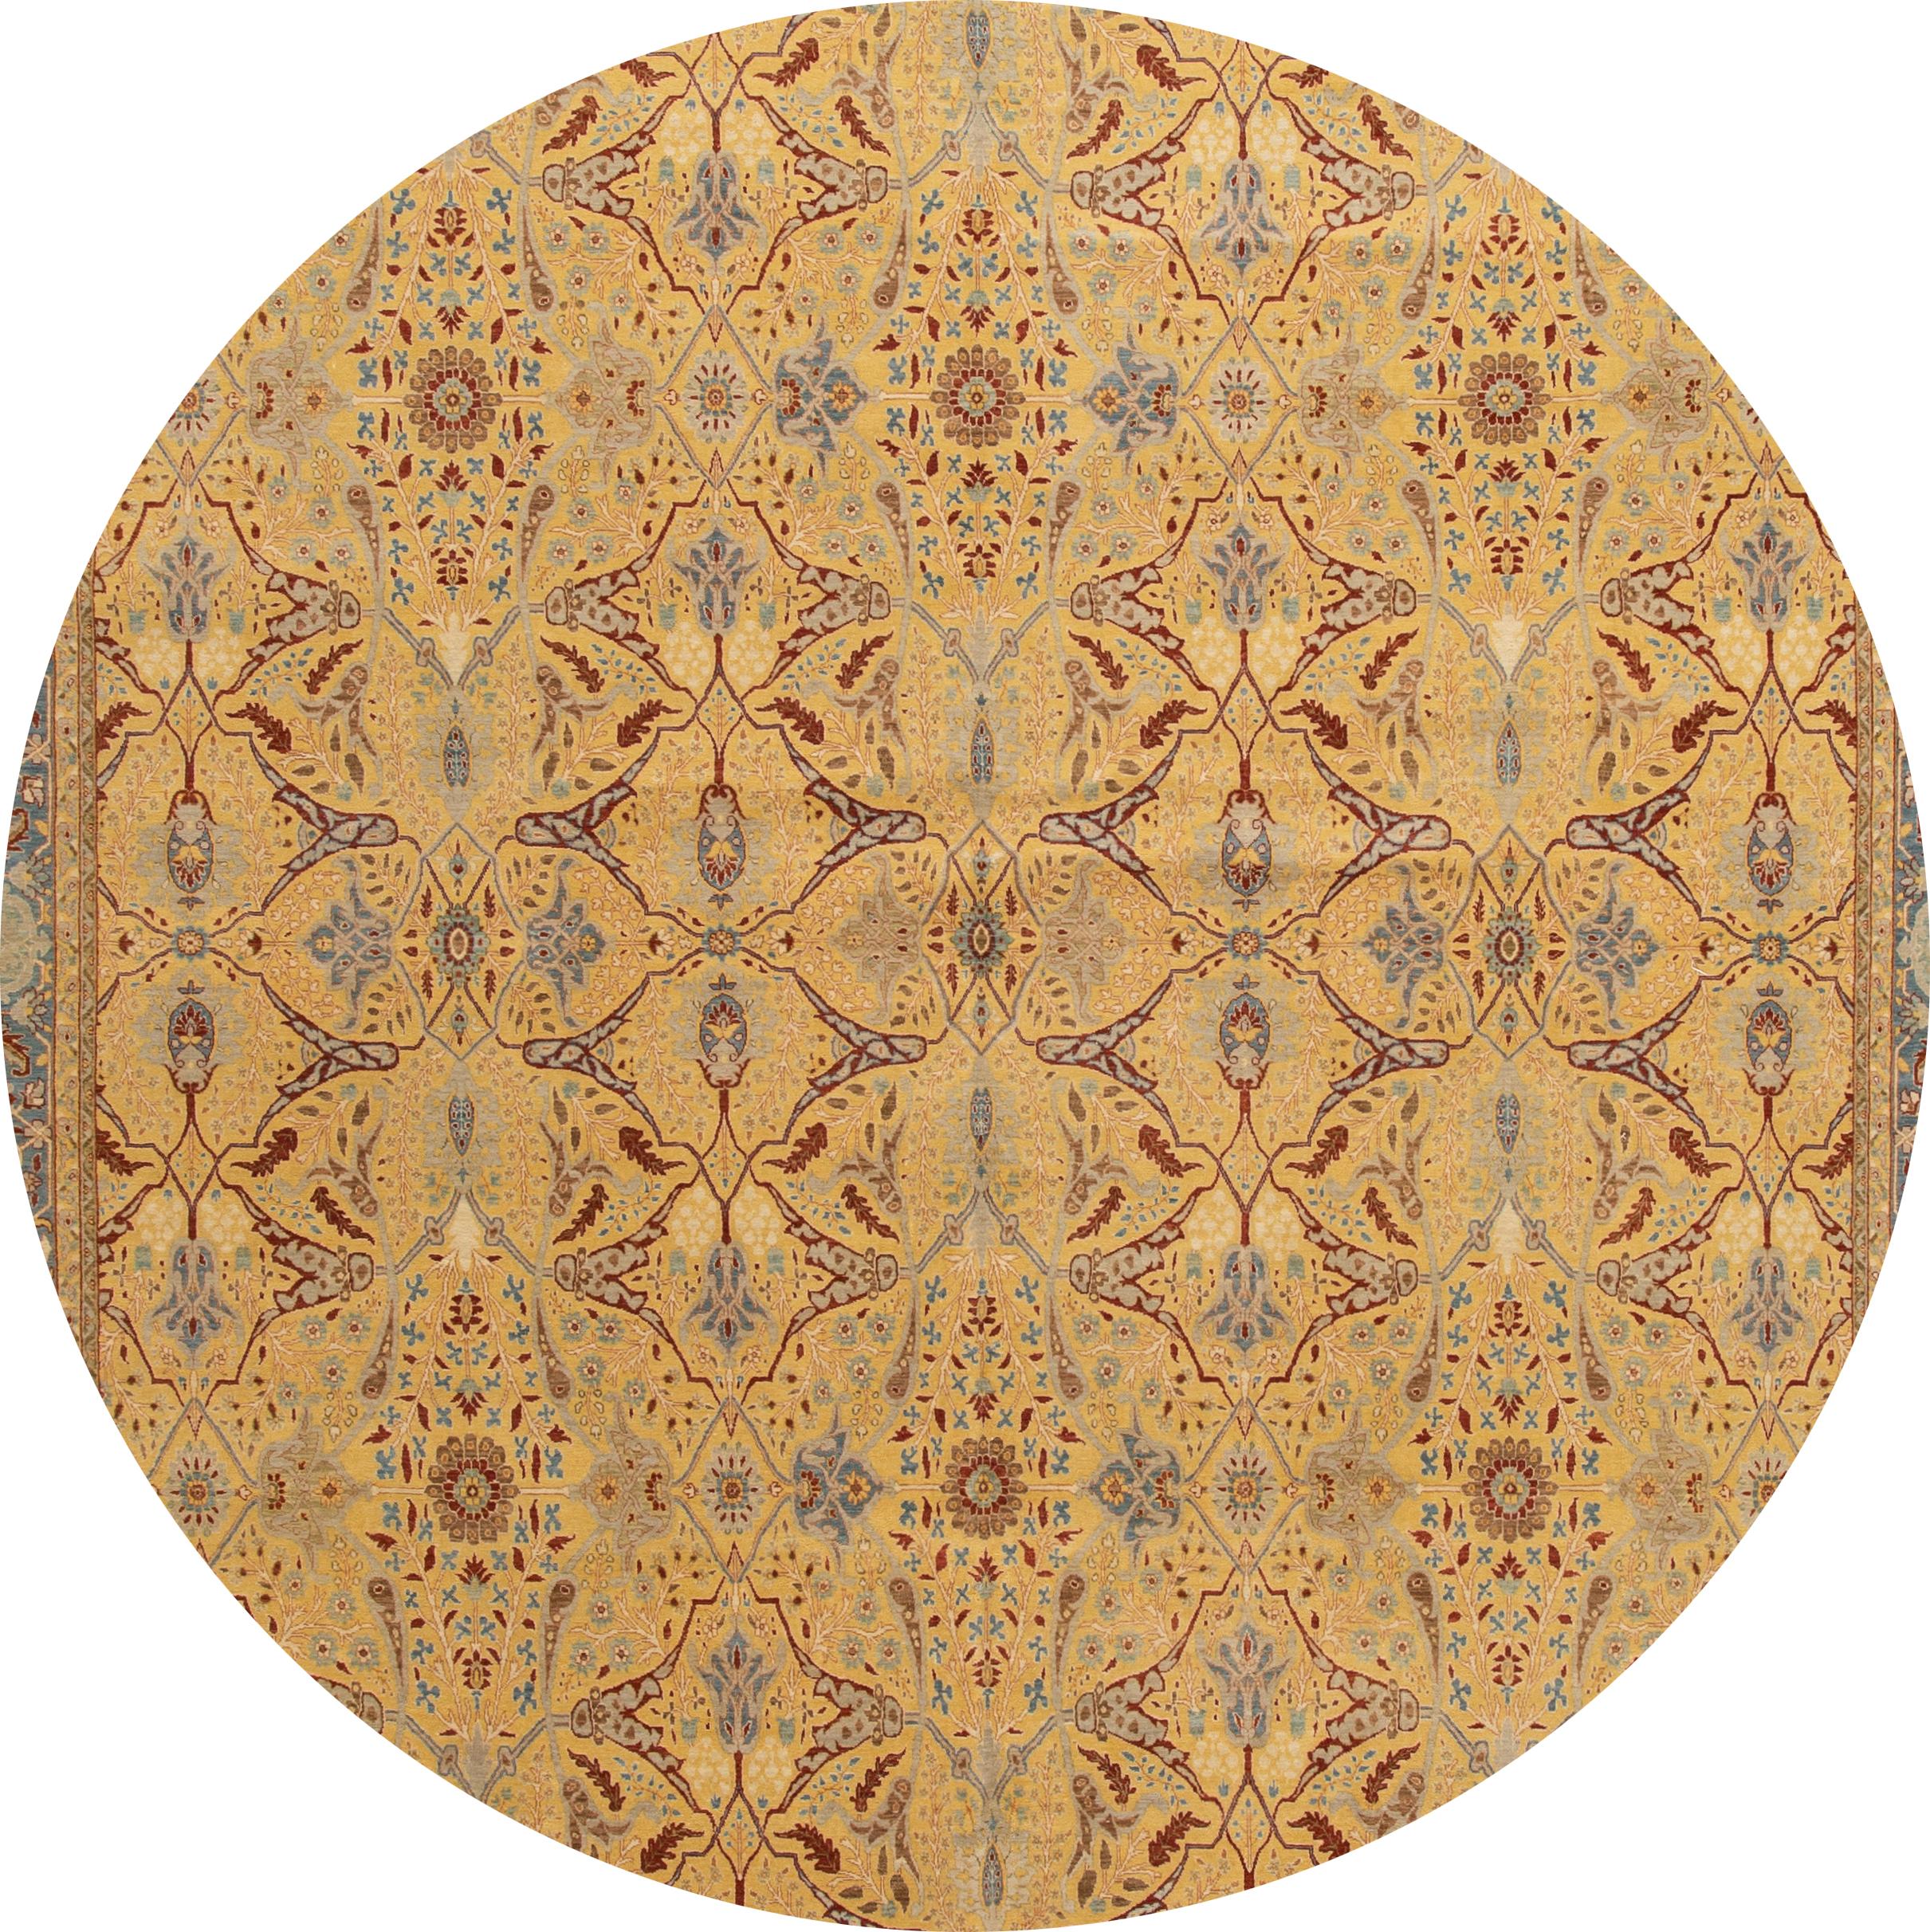 Beautiful hand knotted wool, modern Indian Tabriz rug. This rug has a yellow field with blue and brown accents in all-over geometric medallion design. 

This rug measures 9' 8